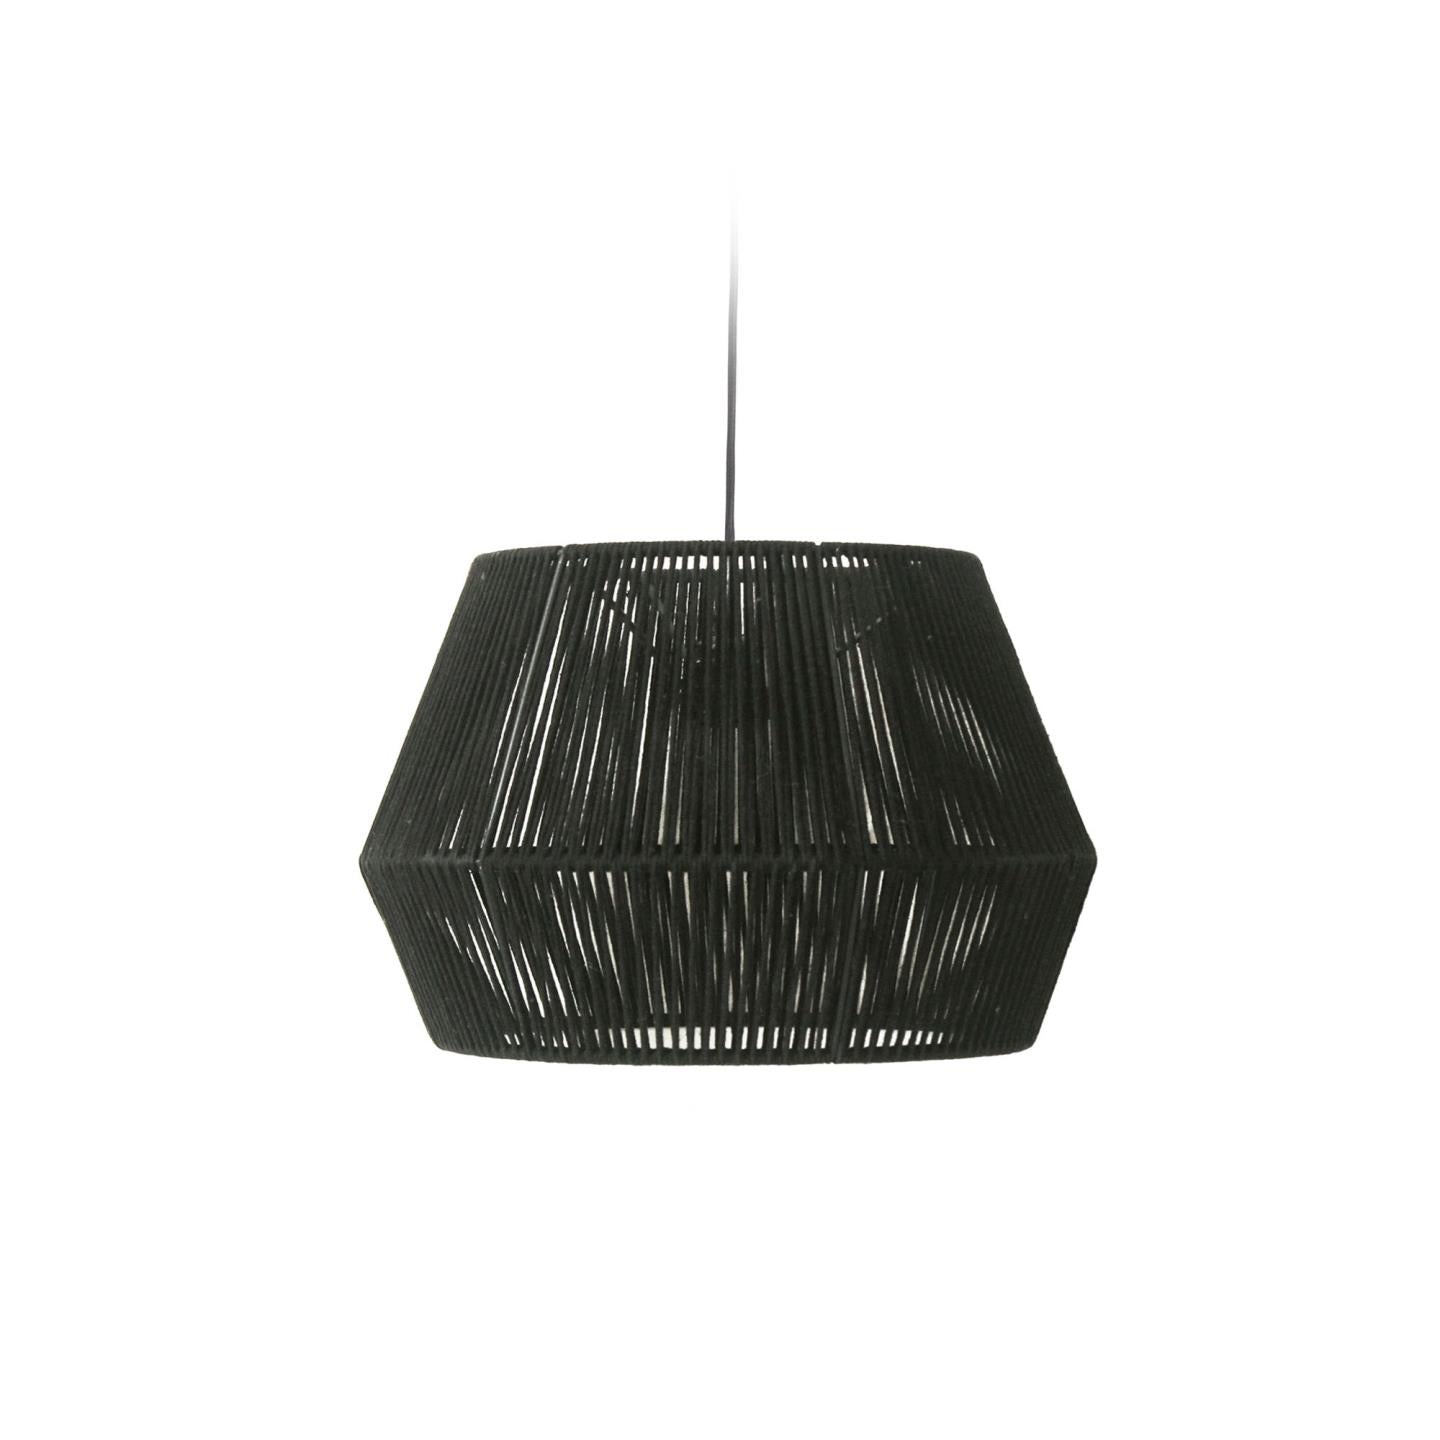 Cantia cotton ceiling light shade with black finish Ø 36,5 cm